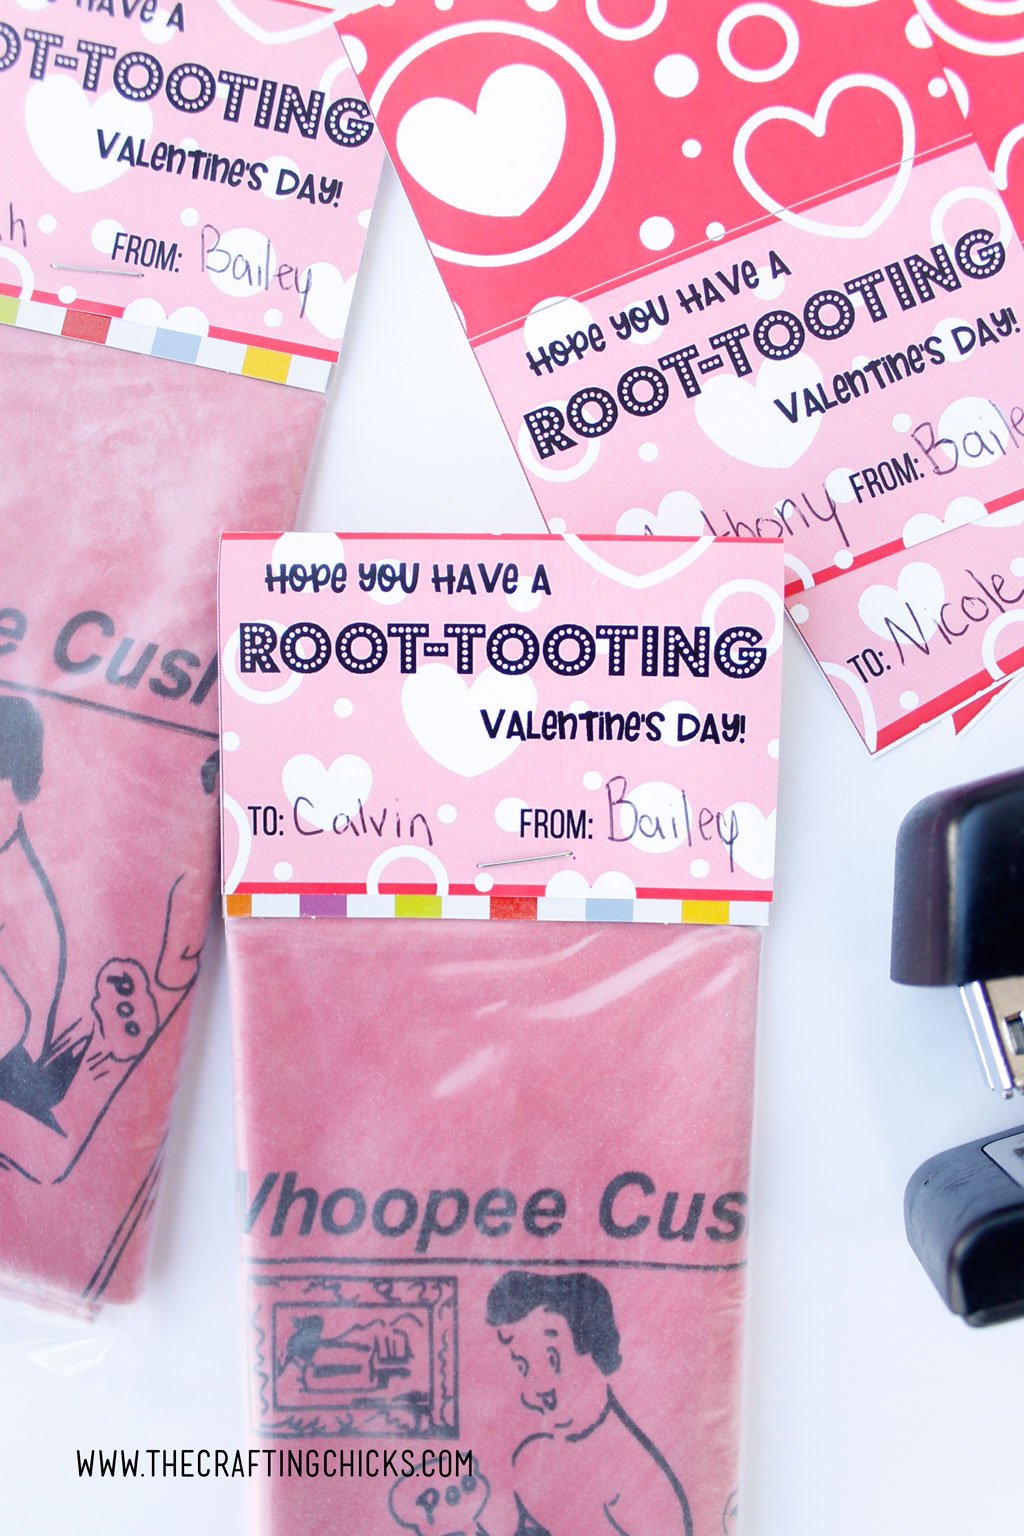 Let your kids give a laugh this Valentine with this fun "Have A Root-Tooting Valentines Day Printable" attached to a whoopee cushion. Kids will think it's hilarious. It will be the hit of the class valentines!